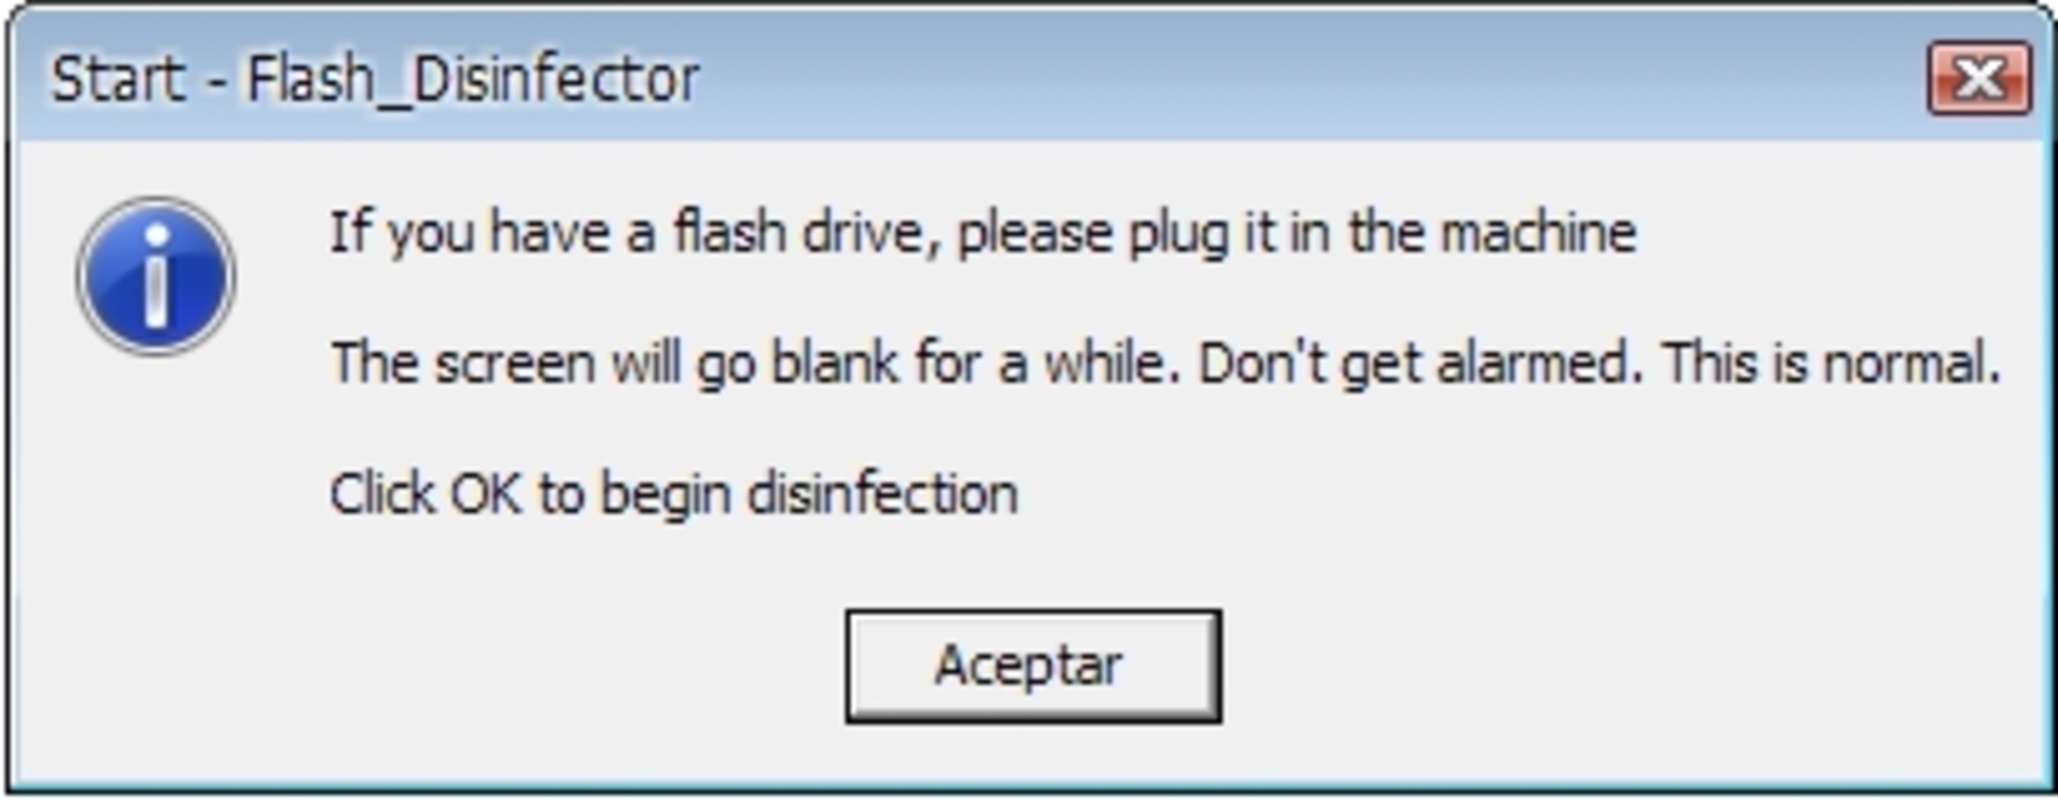 Flash Disinfector feature